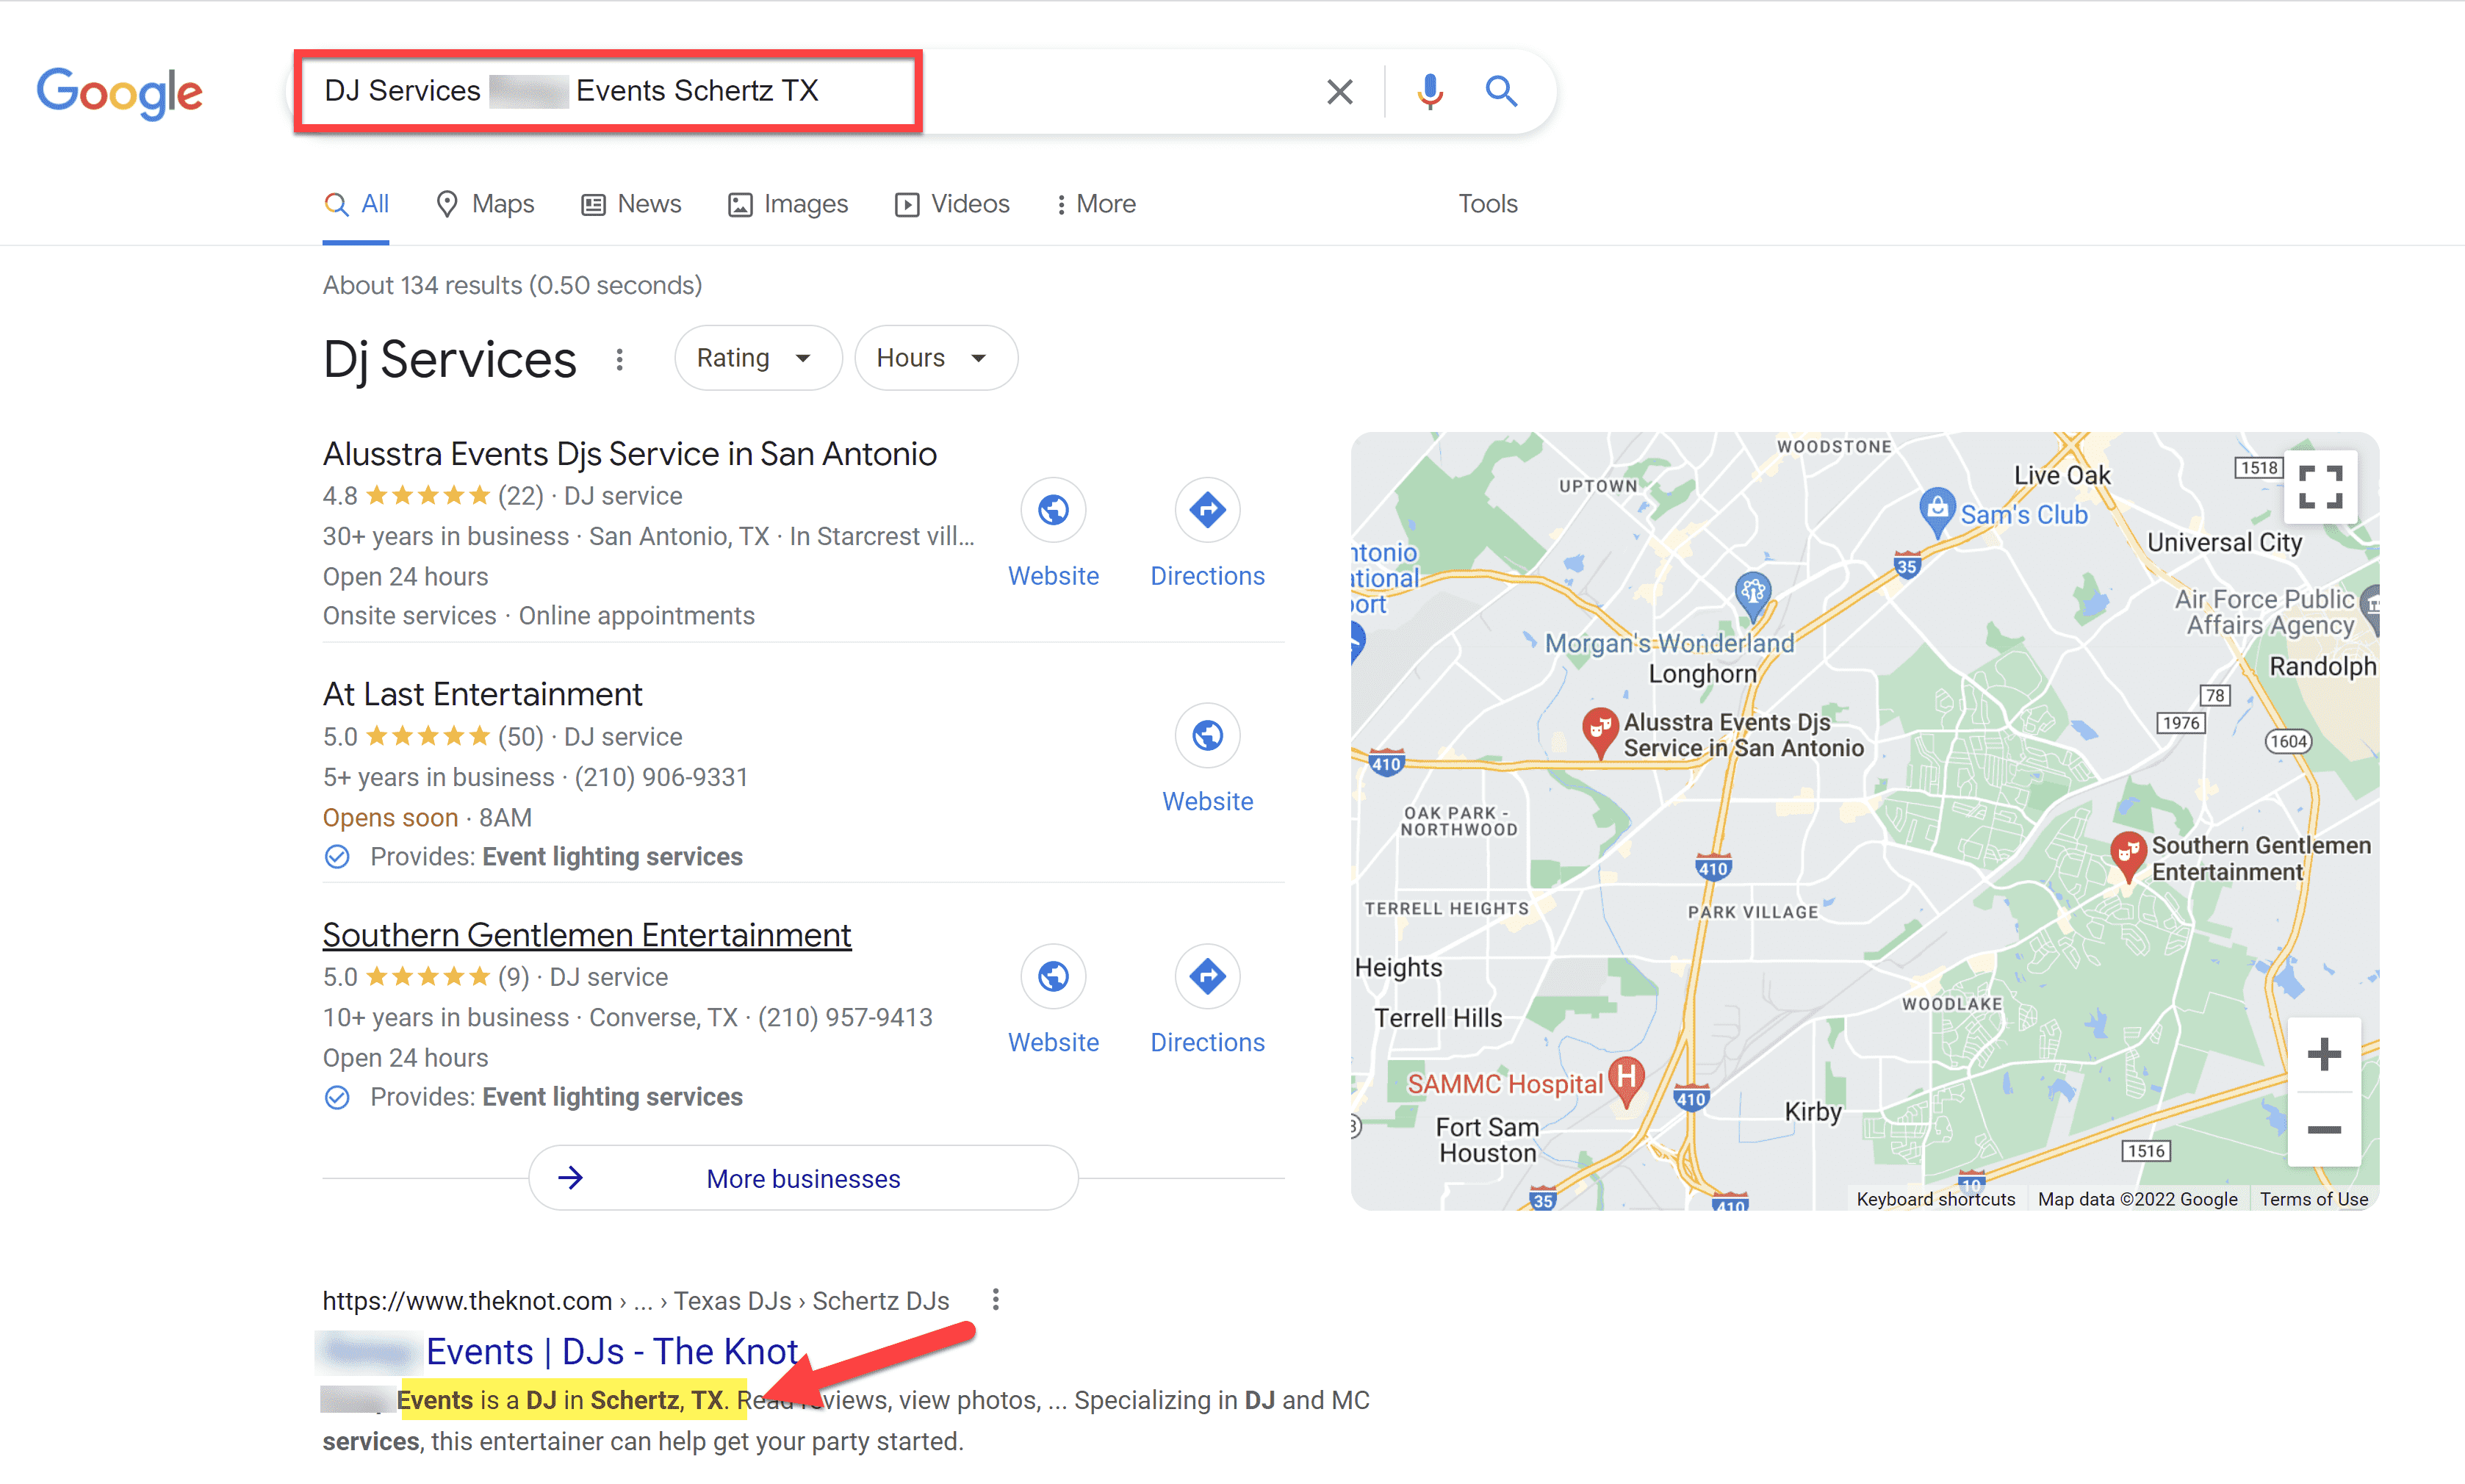 Knowledge Panel Doesn't Show Up For Exact Search